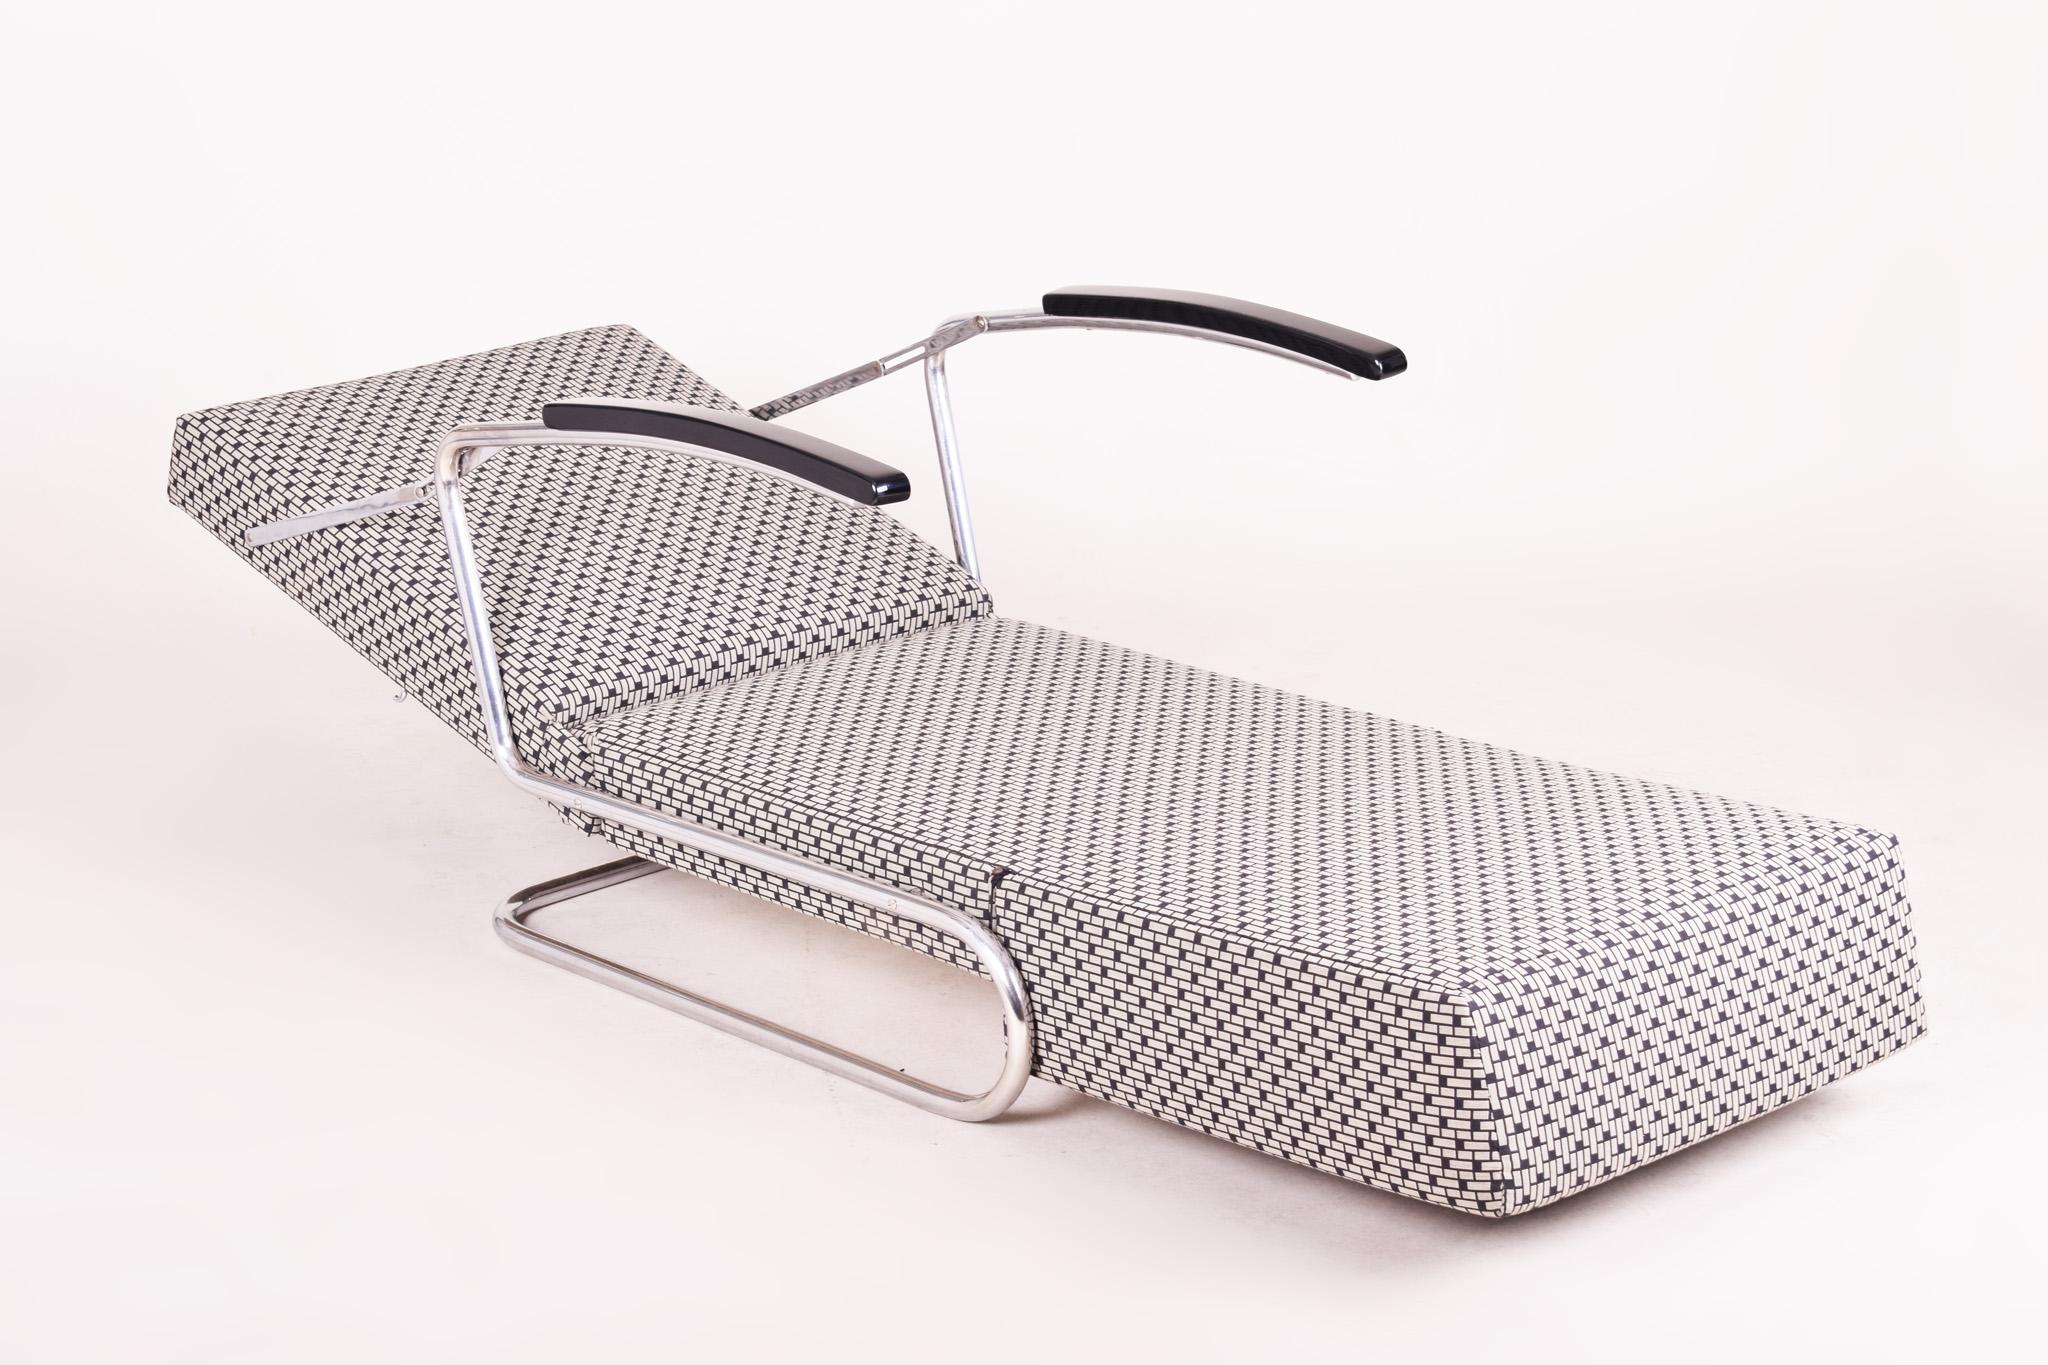 Unique item from Mücke and Melder Company form Czechoslovakia.
Designed chrome adjustable armchair covered by Backhausen fabric can be folded into a bed.
Perfect example of Bauhaus era in Czechoslovakia.

Dimensions after layout:
Depth of bed